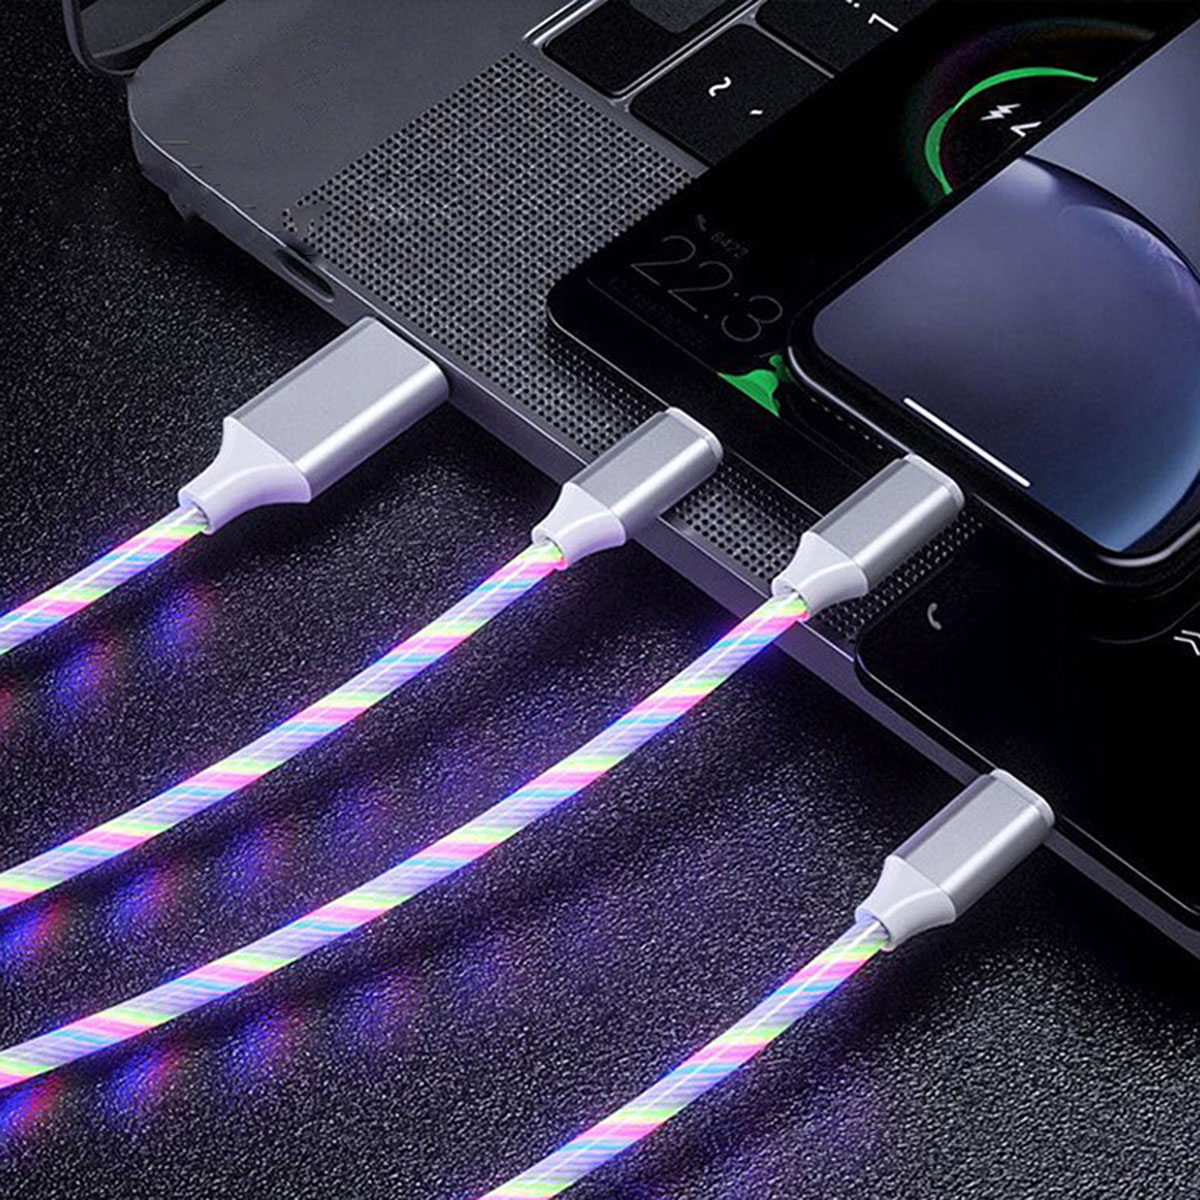 Platinet USB USB A - USB Type-C charging cable with LED color light effect WHITE - 2A, 1m, *USBAM, *USBCM